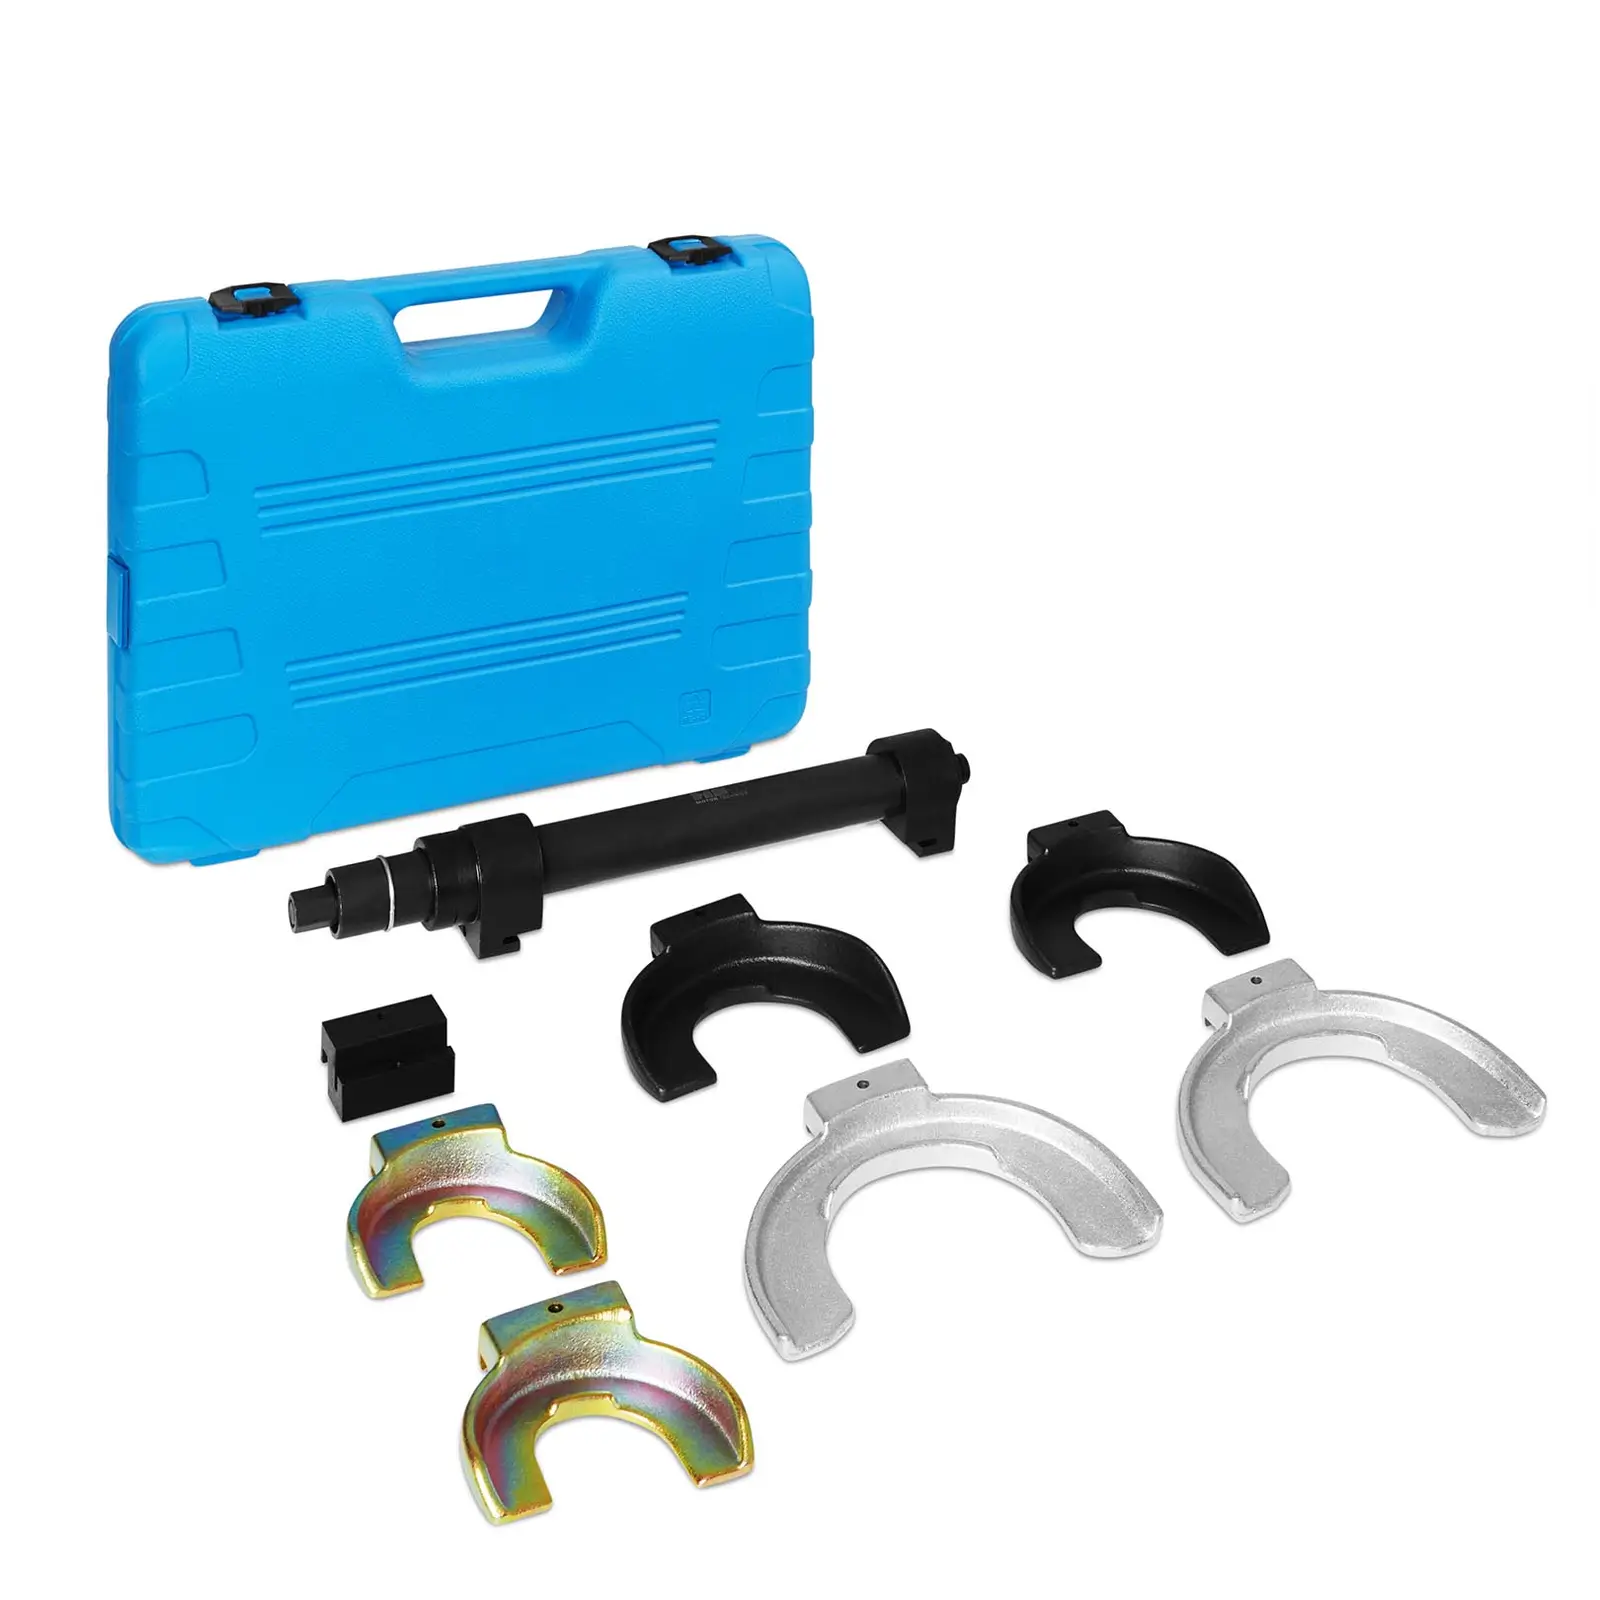 Valve Spring Compressor Tool - 3 pairs of clamping heads